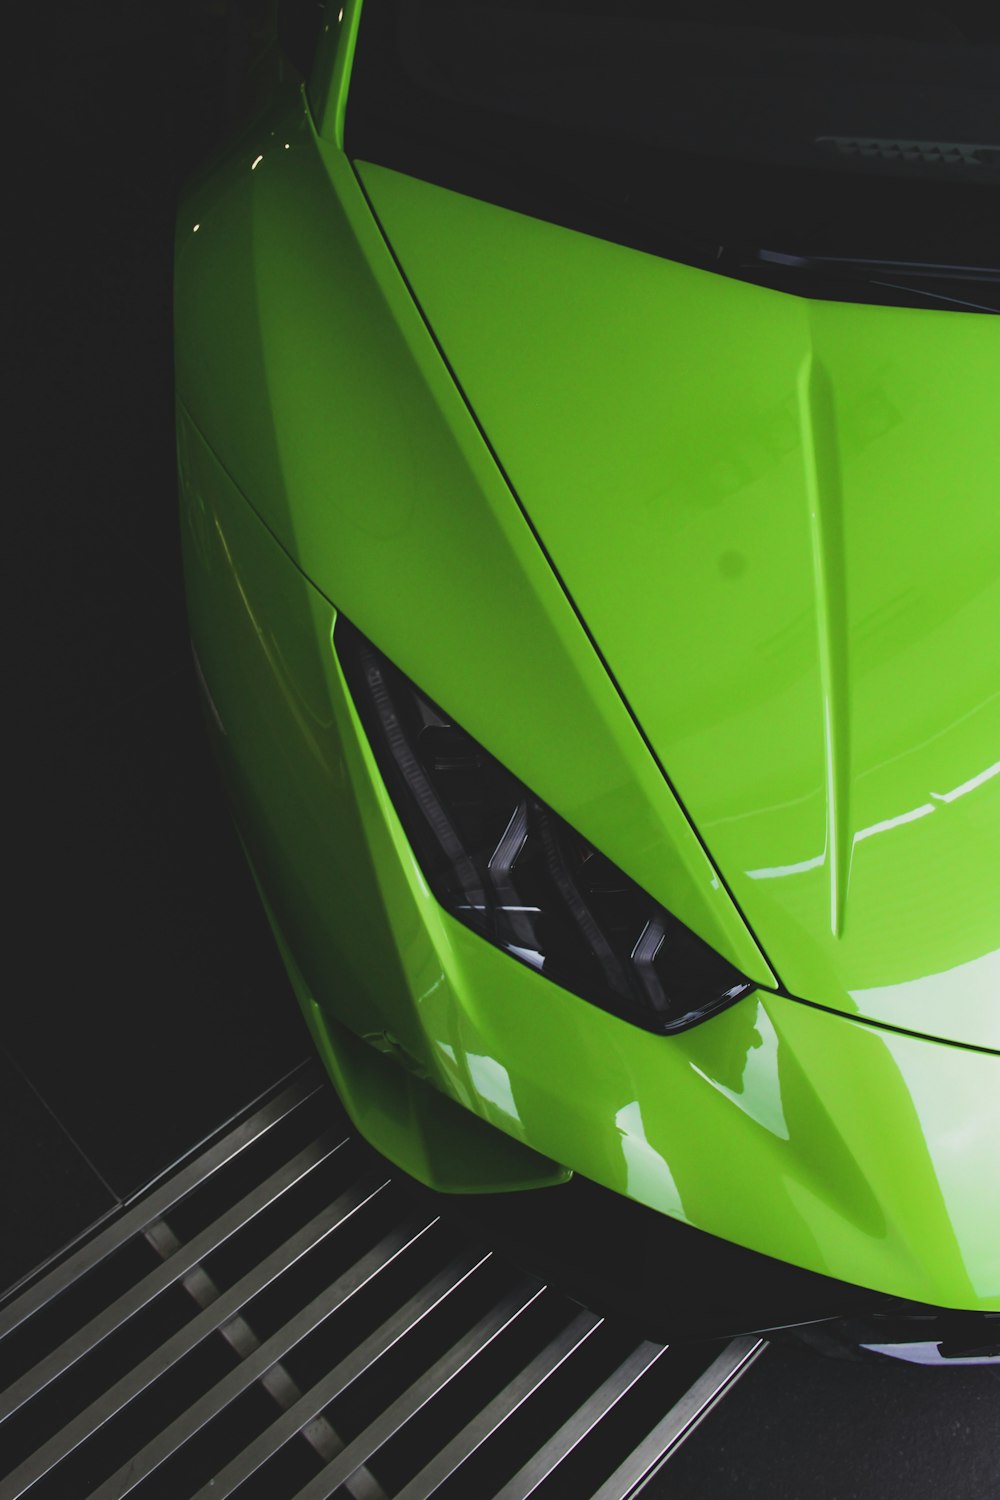 Green Lamborghini Pictures | Download Free Images on Unsplash